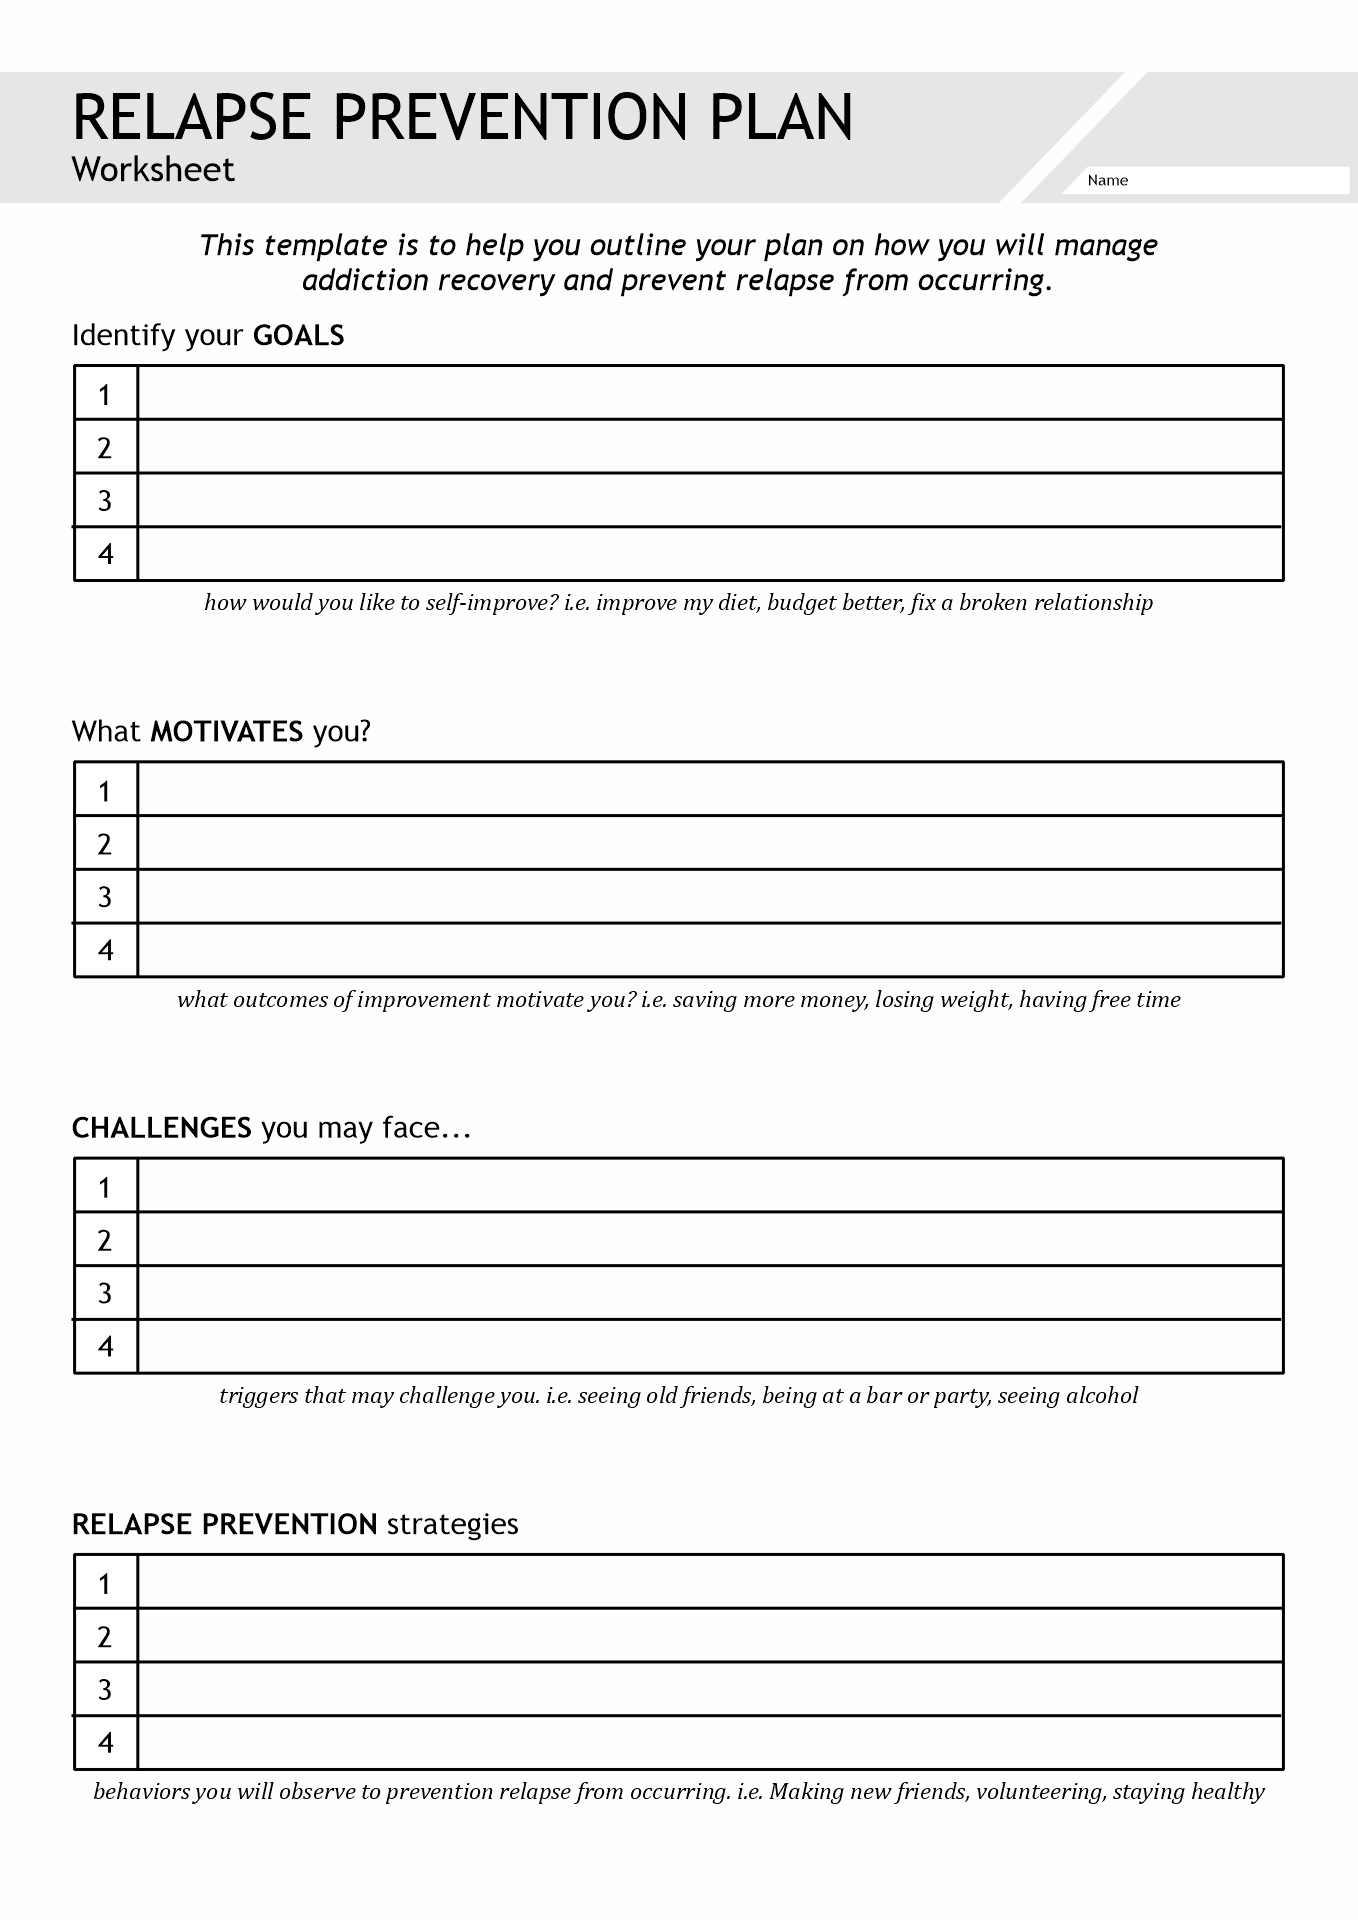 Printable Addiction Recovery Worksheets